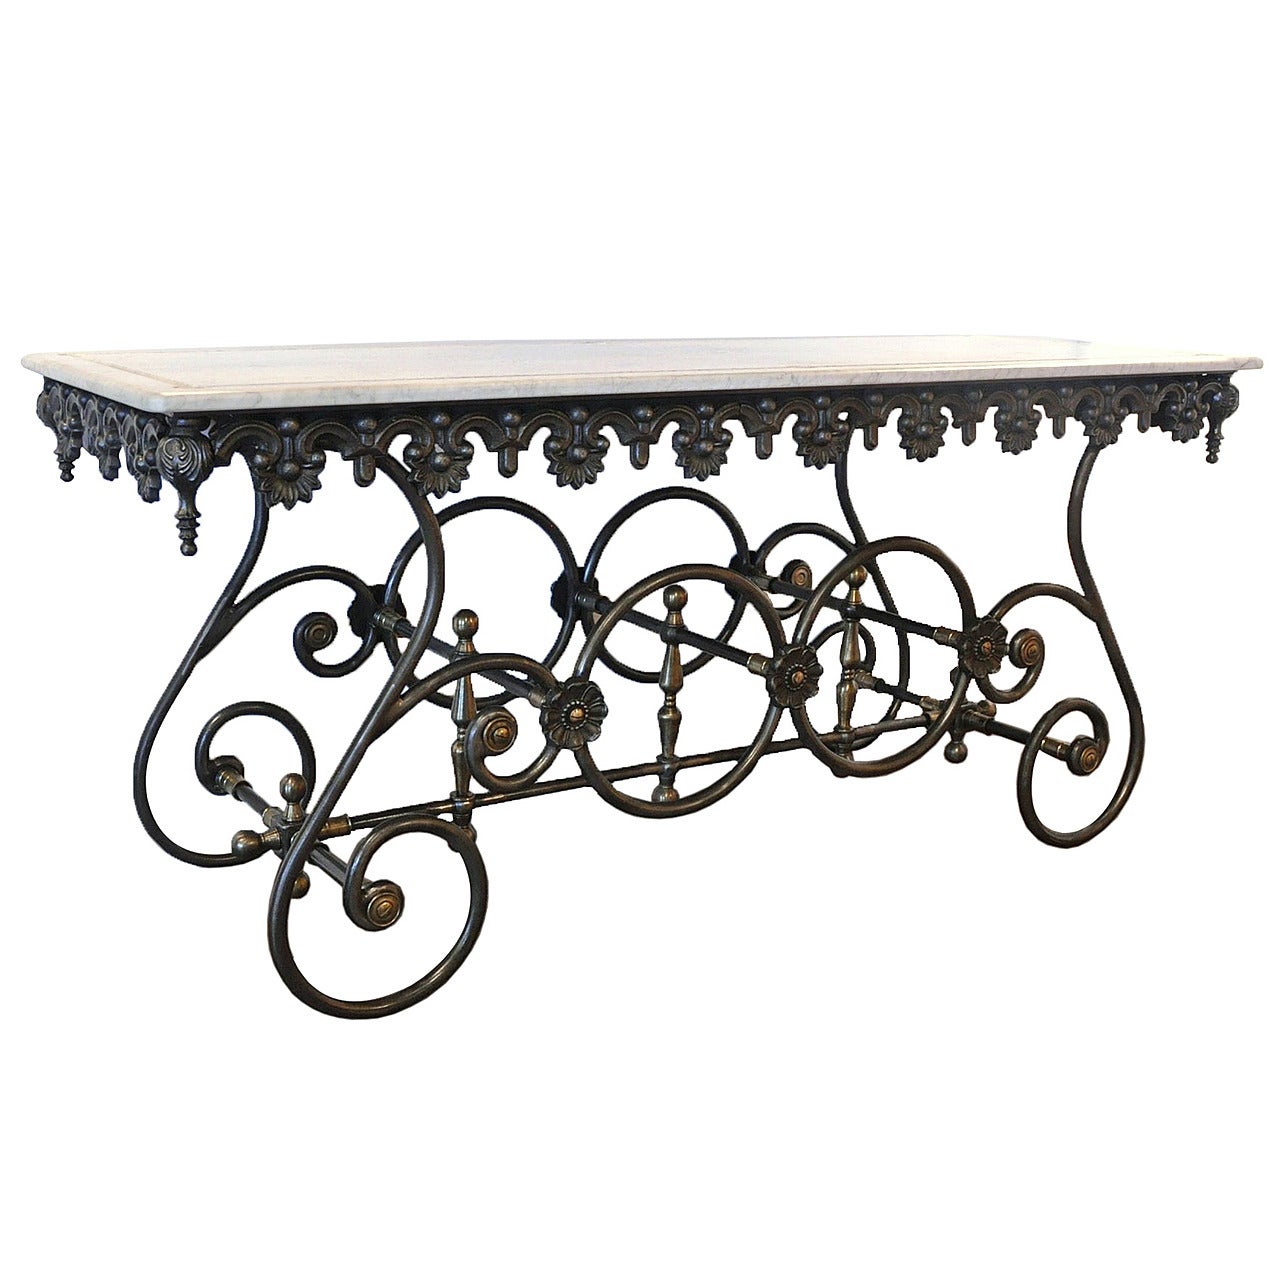 Polished Iron Butcher Pastry Table with Marble Top